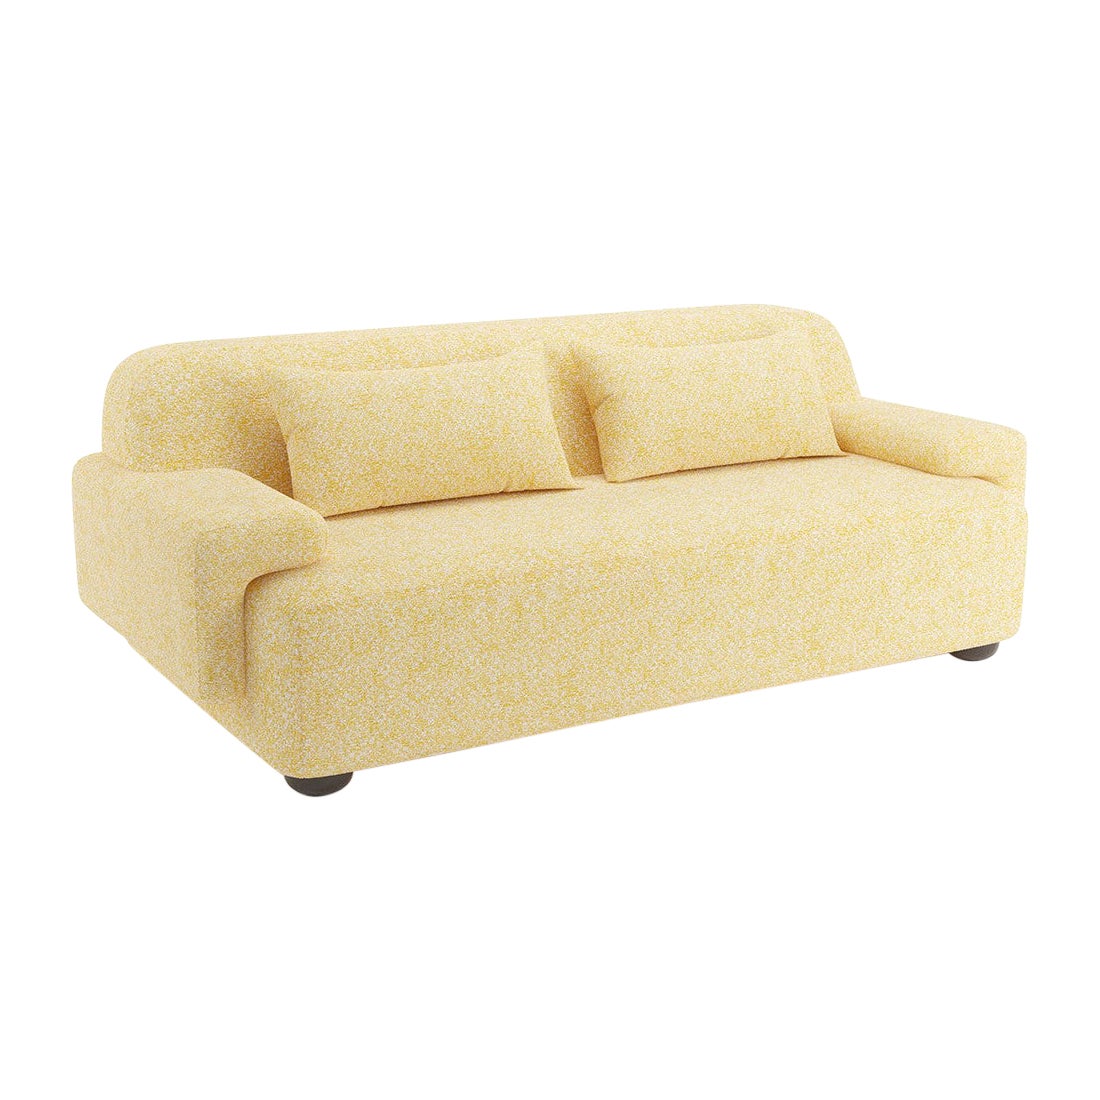 Popus Editions Lena 2.5 Seater Sofa in Straw Zanzi Linen with Wool Blend Fabric